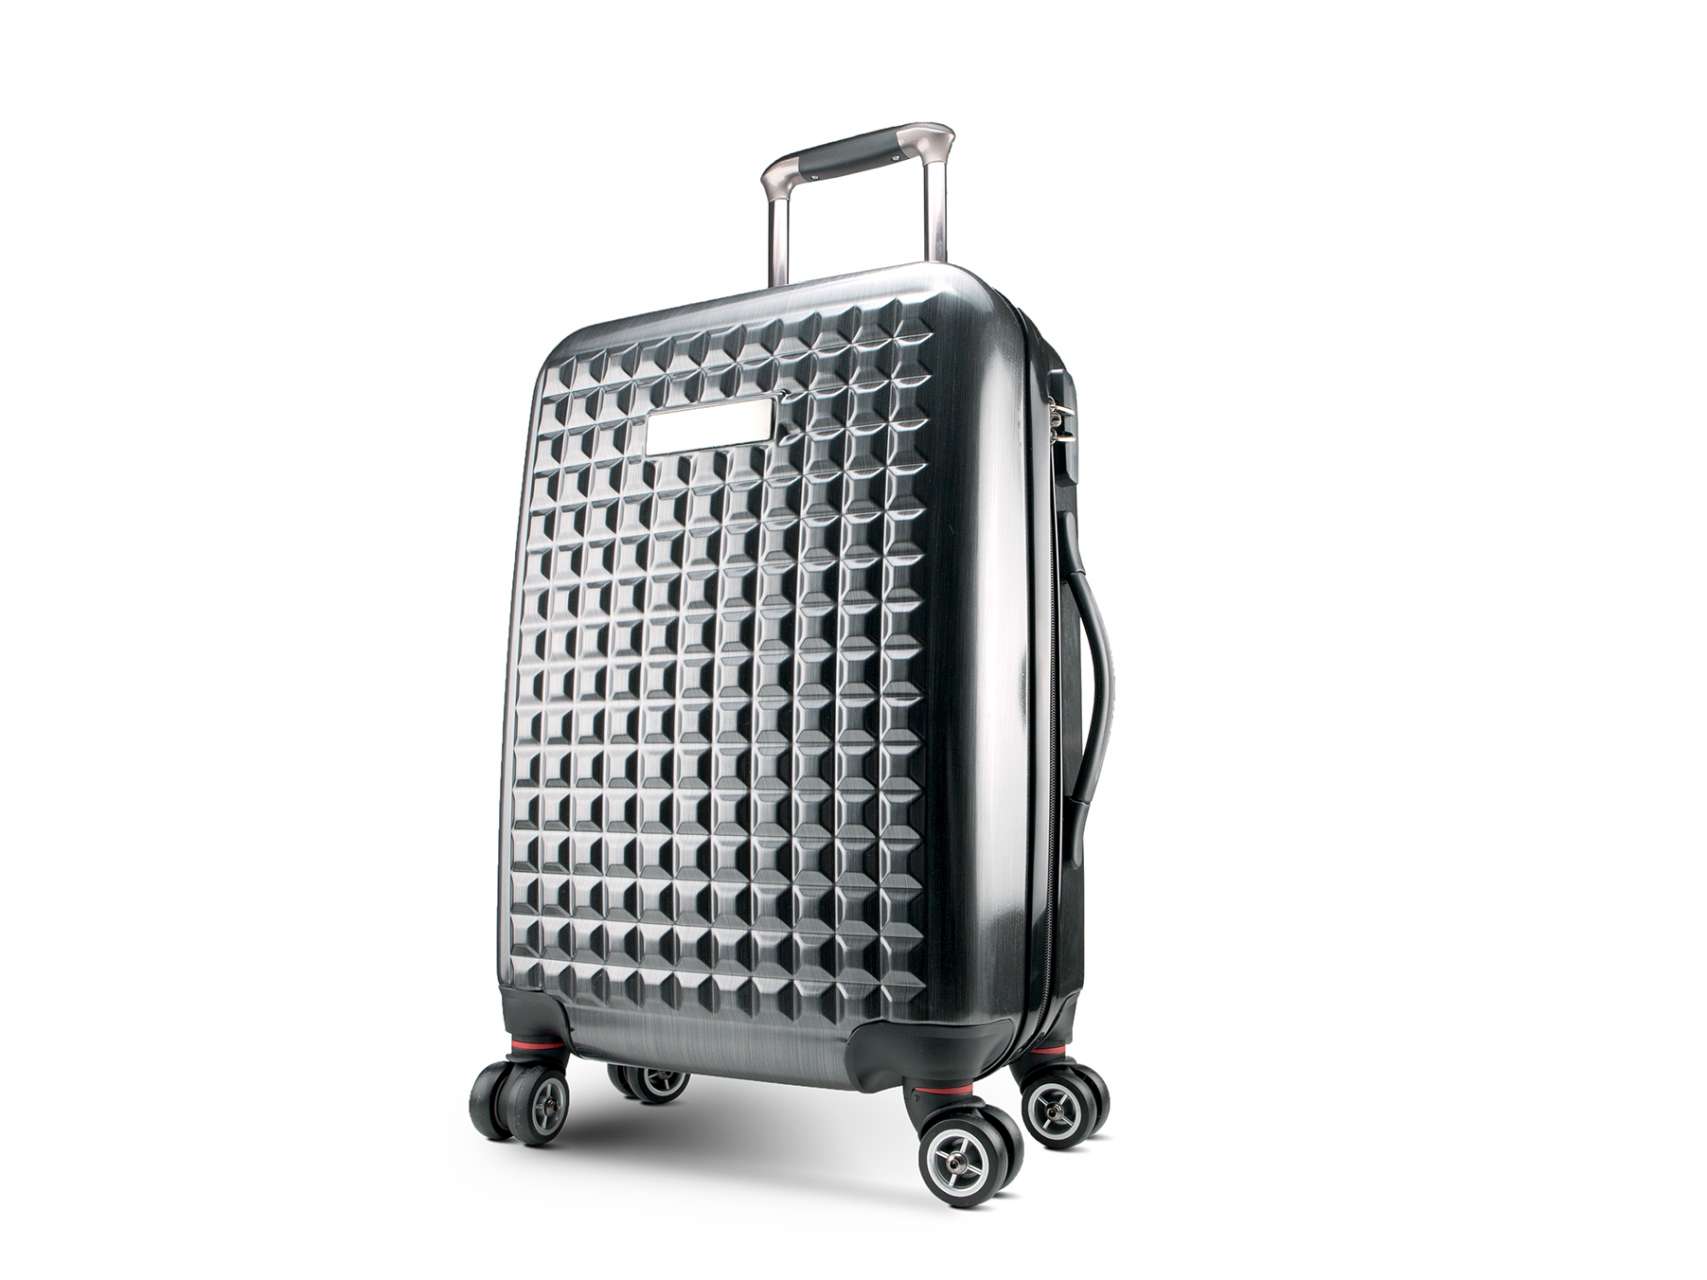 EXTRA LARGE PC TROLLEY SUITCASE